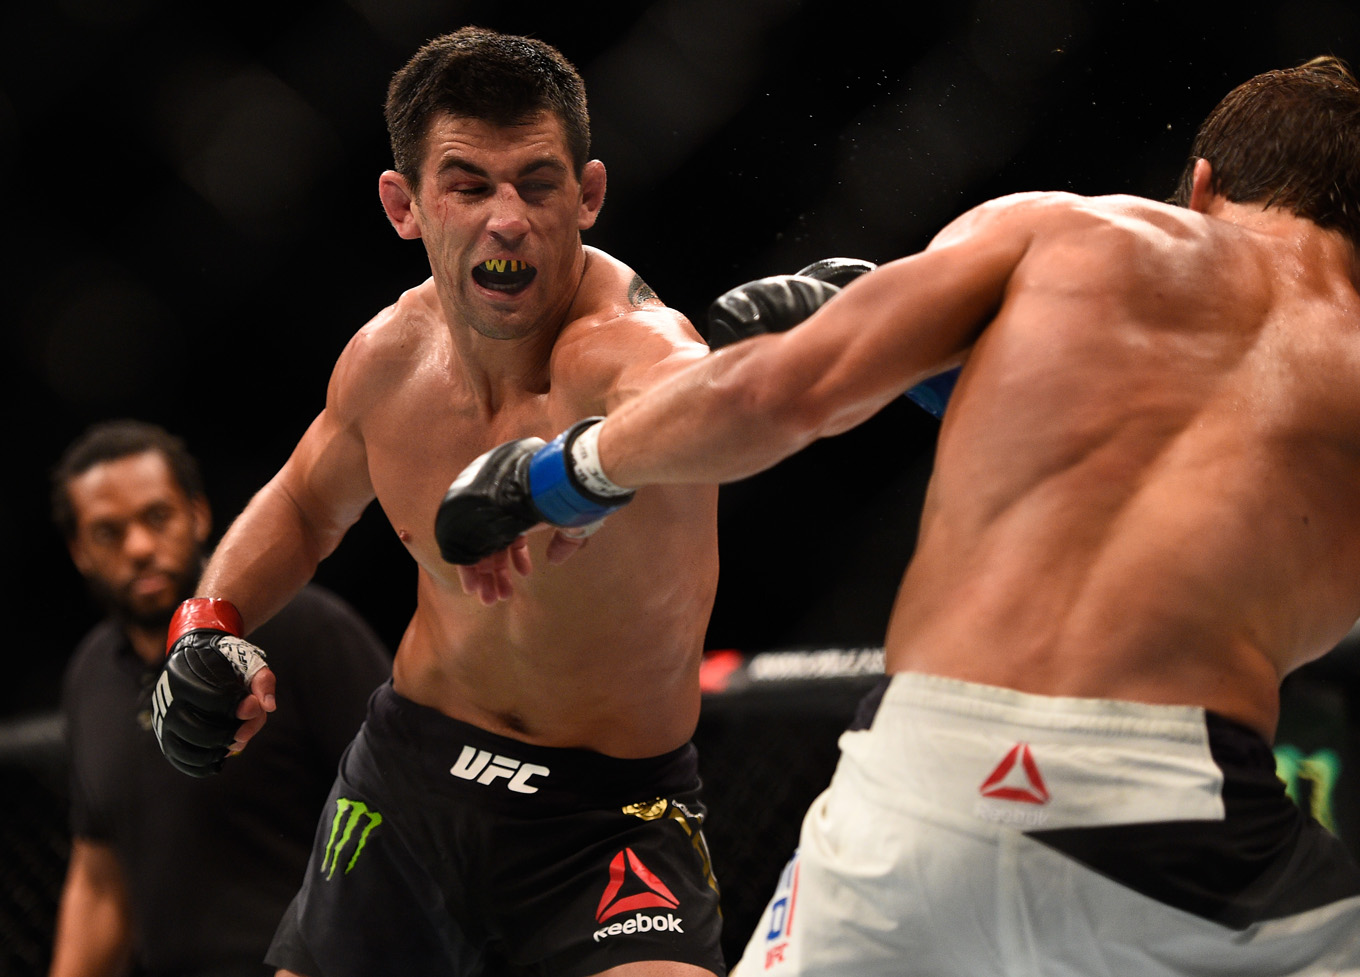 Monster Energy’s Dominick Cruz Defends his UFC Bantamweight Belt in the Co-Main Event of UFC 199 with a Unanimous Decision Over longtime Rival Urijah Faber